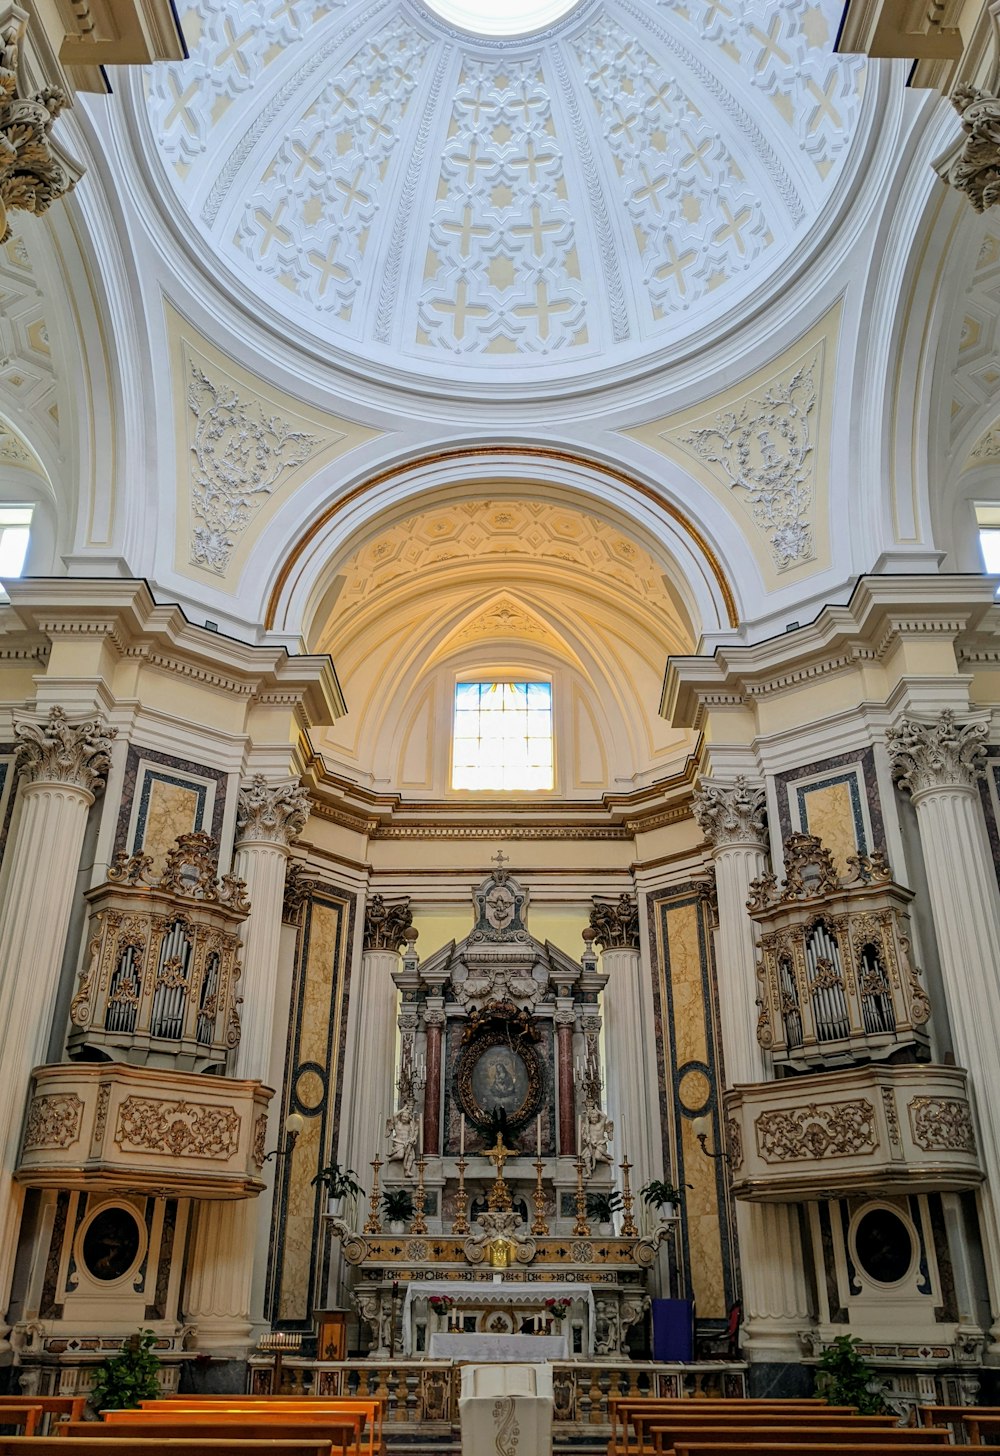 the inside of a church with high ceilings